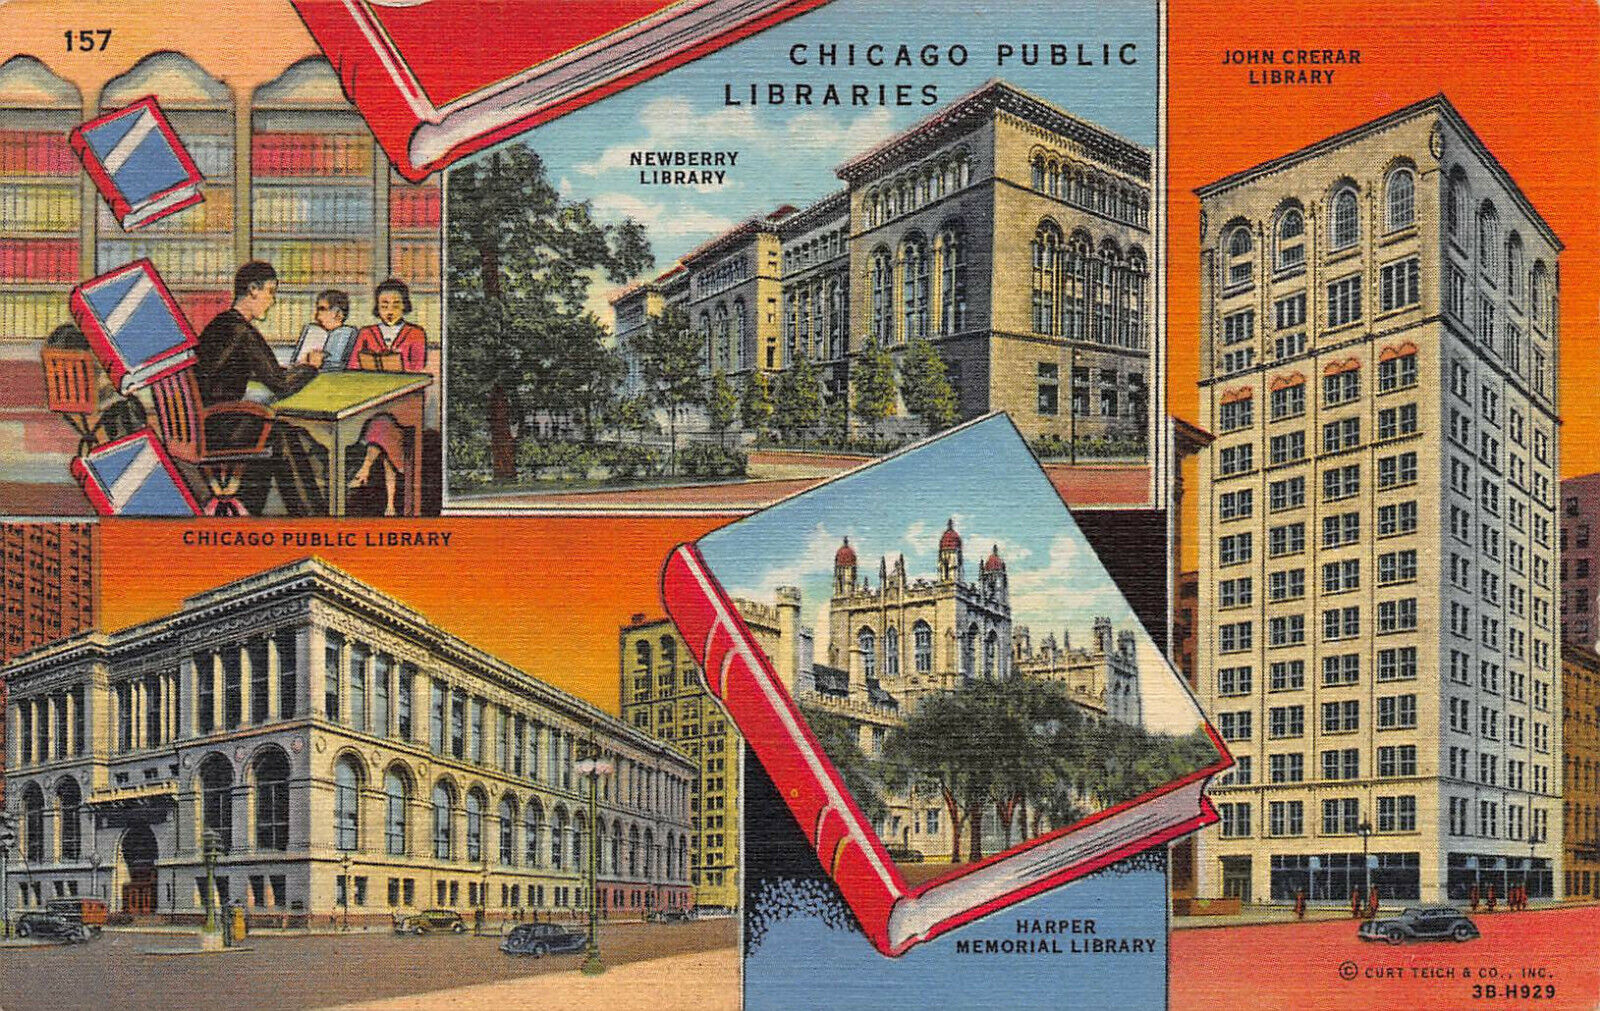 Chicago Public Libraries, Chicago, Illinois, Early Linen Postcard, Used